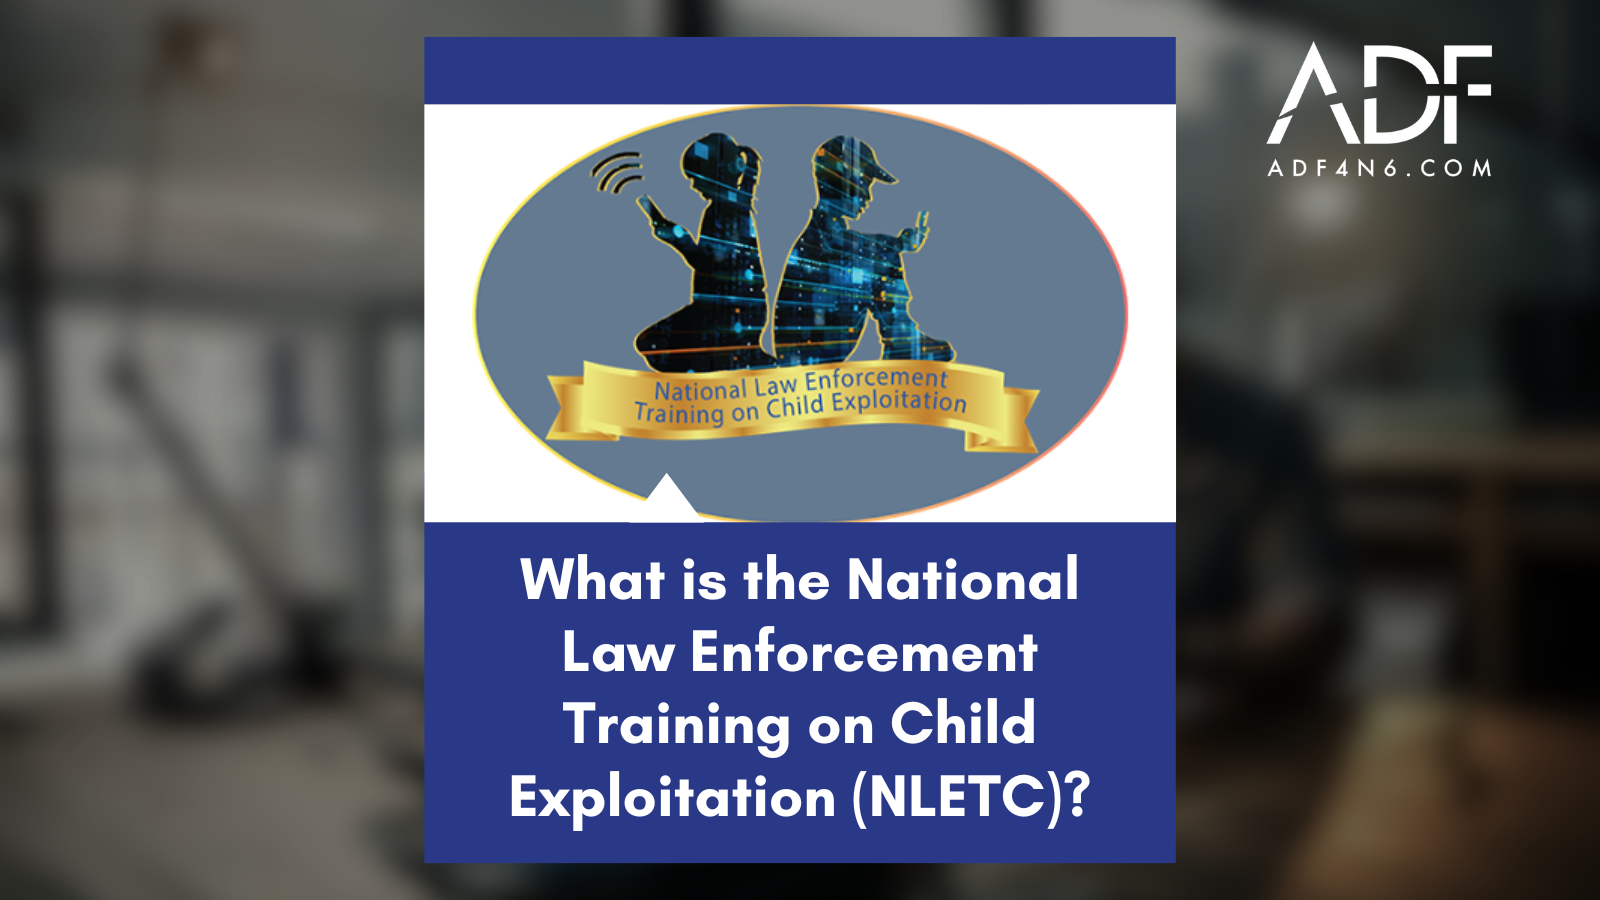 What is the National Law Enforcement Training on Child Exploitation?